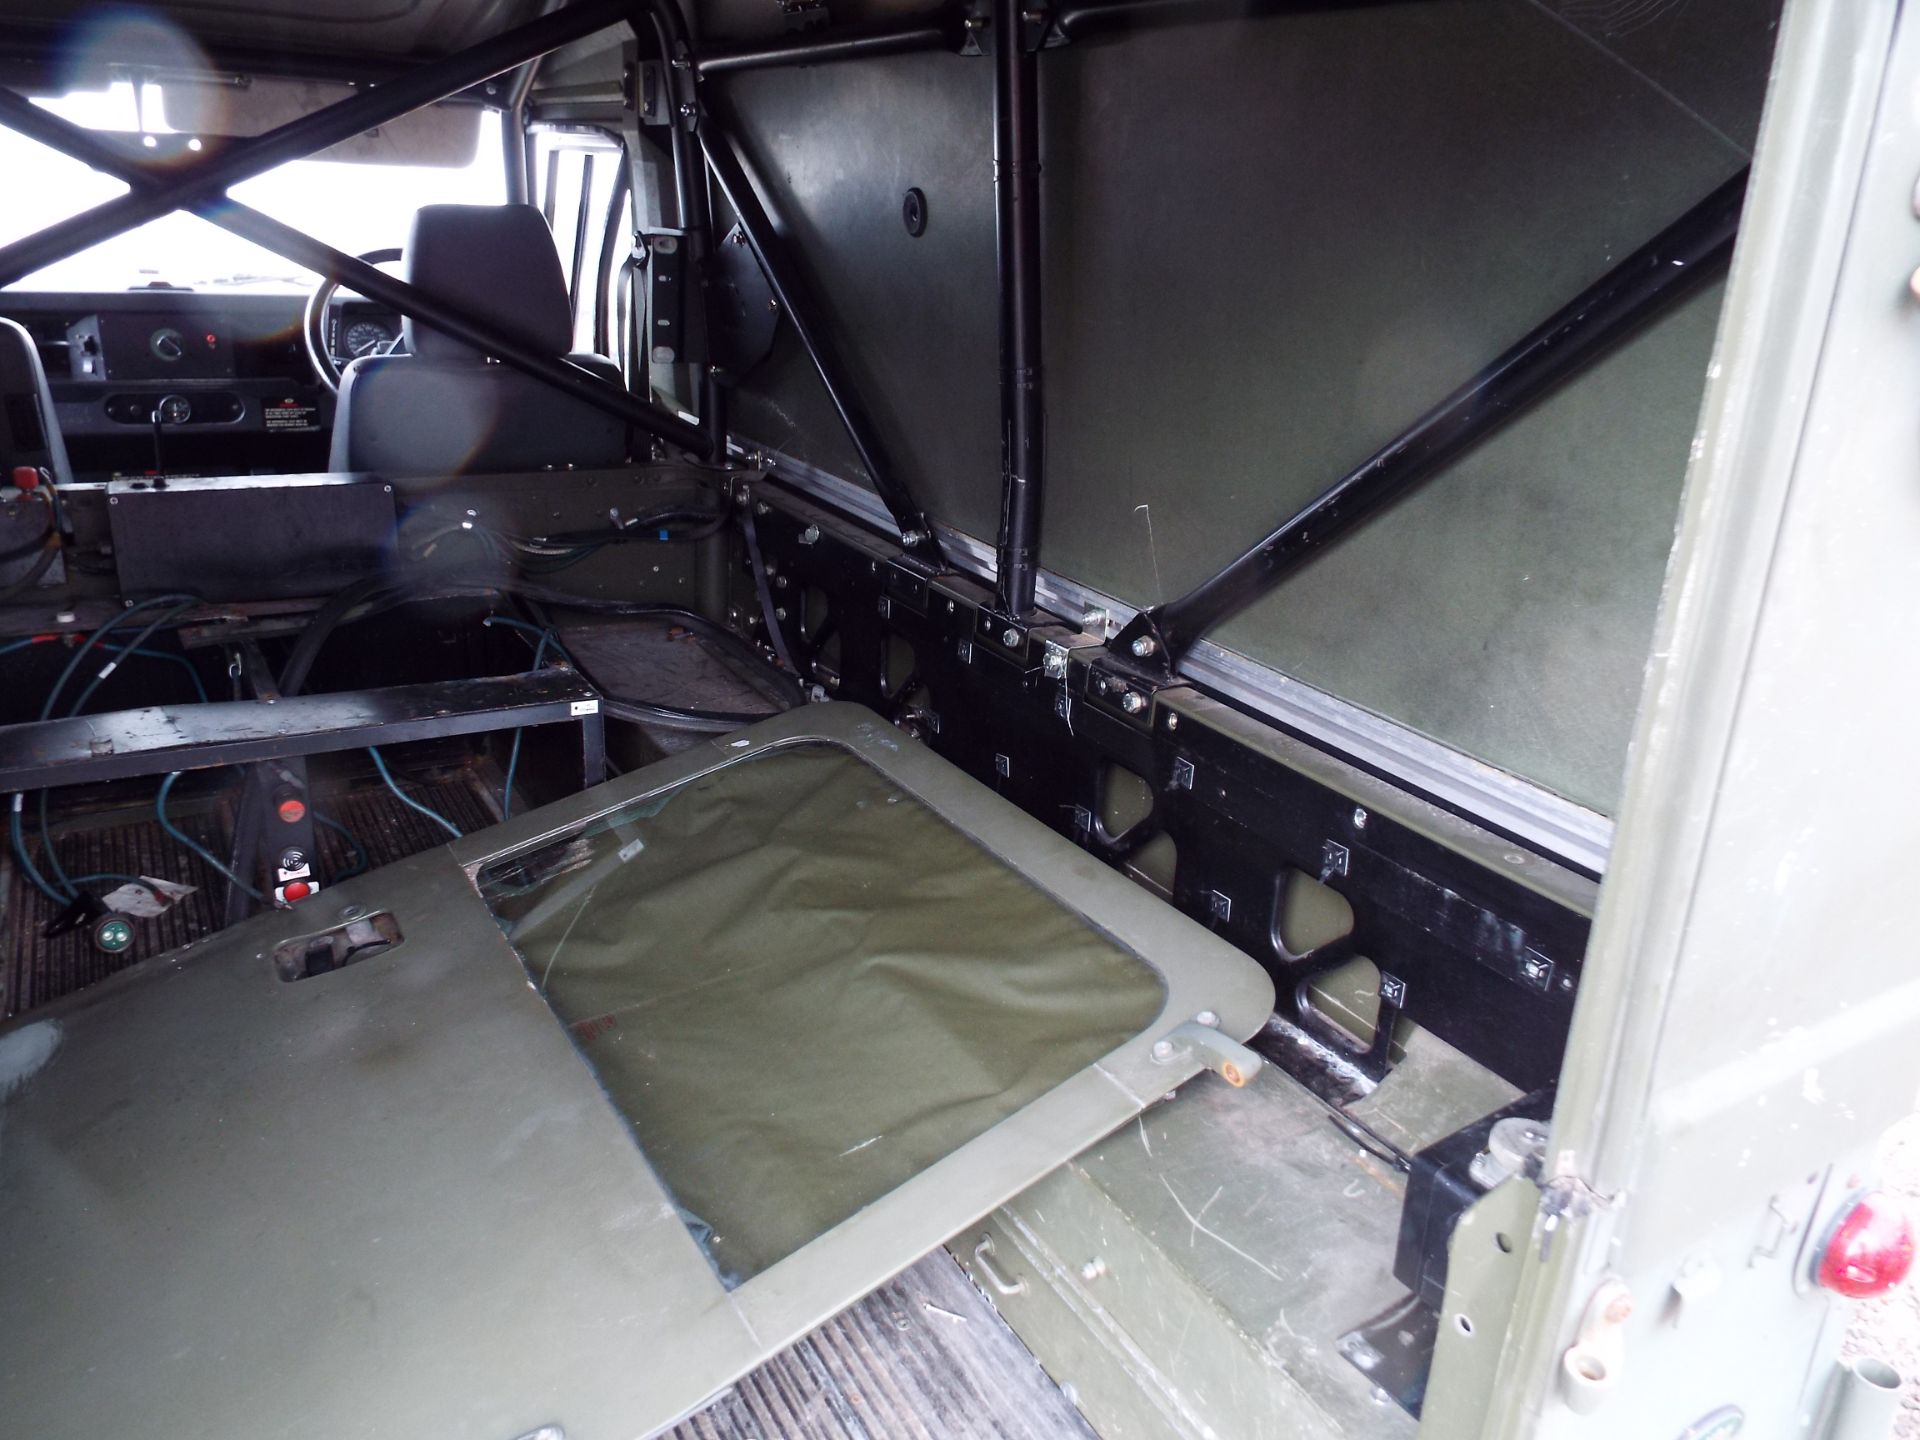 Military Specification Land Rover Wolf 110 Hard Top - Image 16 of 25